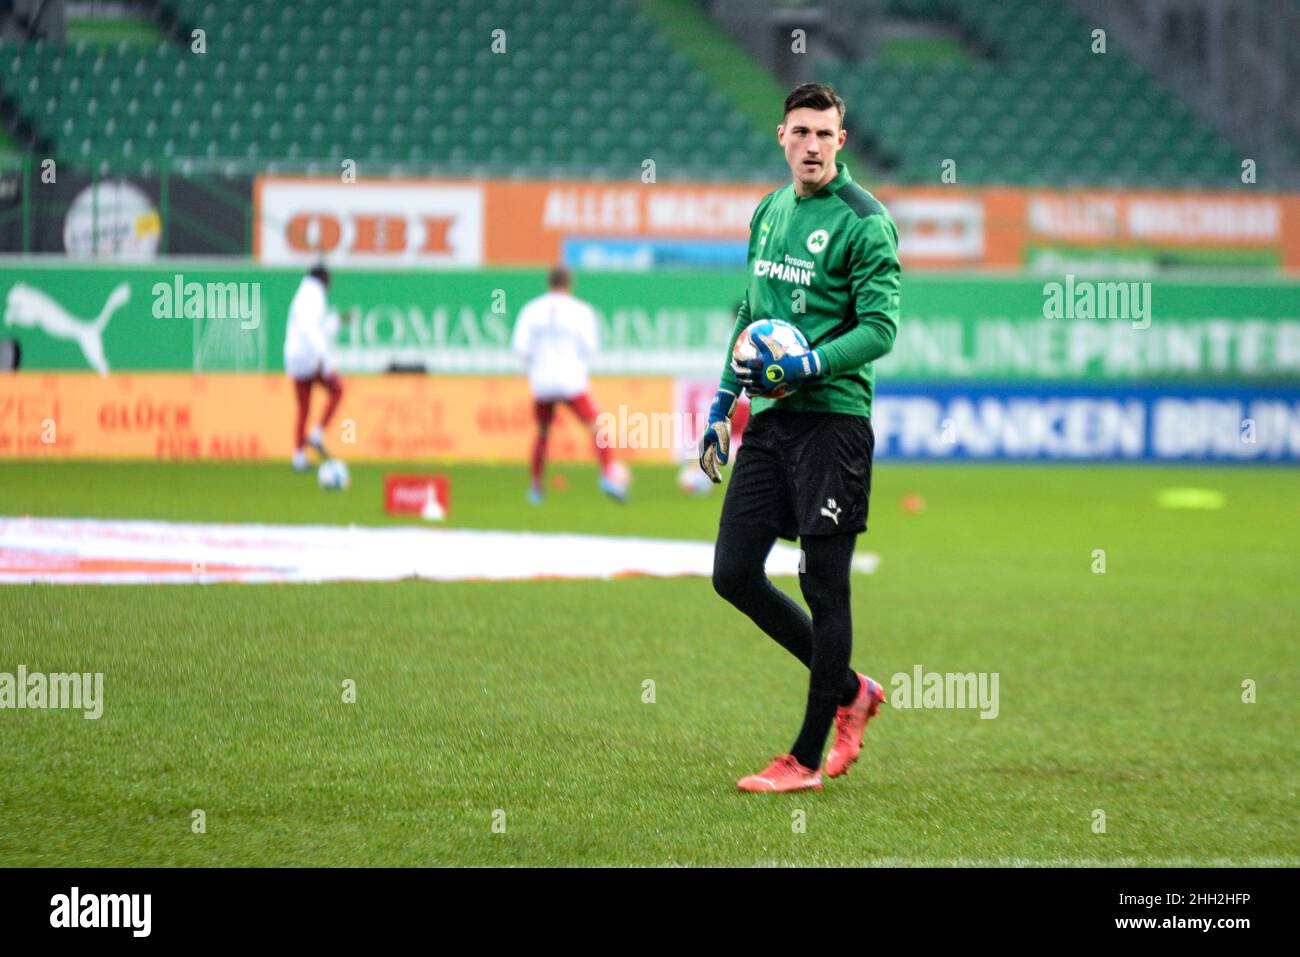 Germany ,Fuerth, Sportpark Ronhof Thomas Sommer - 22 Jan 2022 - Fussball, 1.Bundesliga - SpVgg Greuther Fuerth vs. FSV Mainz 05  Image: Leon Schaffran (SpVgg Greuther Fürth,25) during warmups.  DFL regulations prohibit any use of photographs as image sequences and or quasi-video Stock Photo